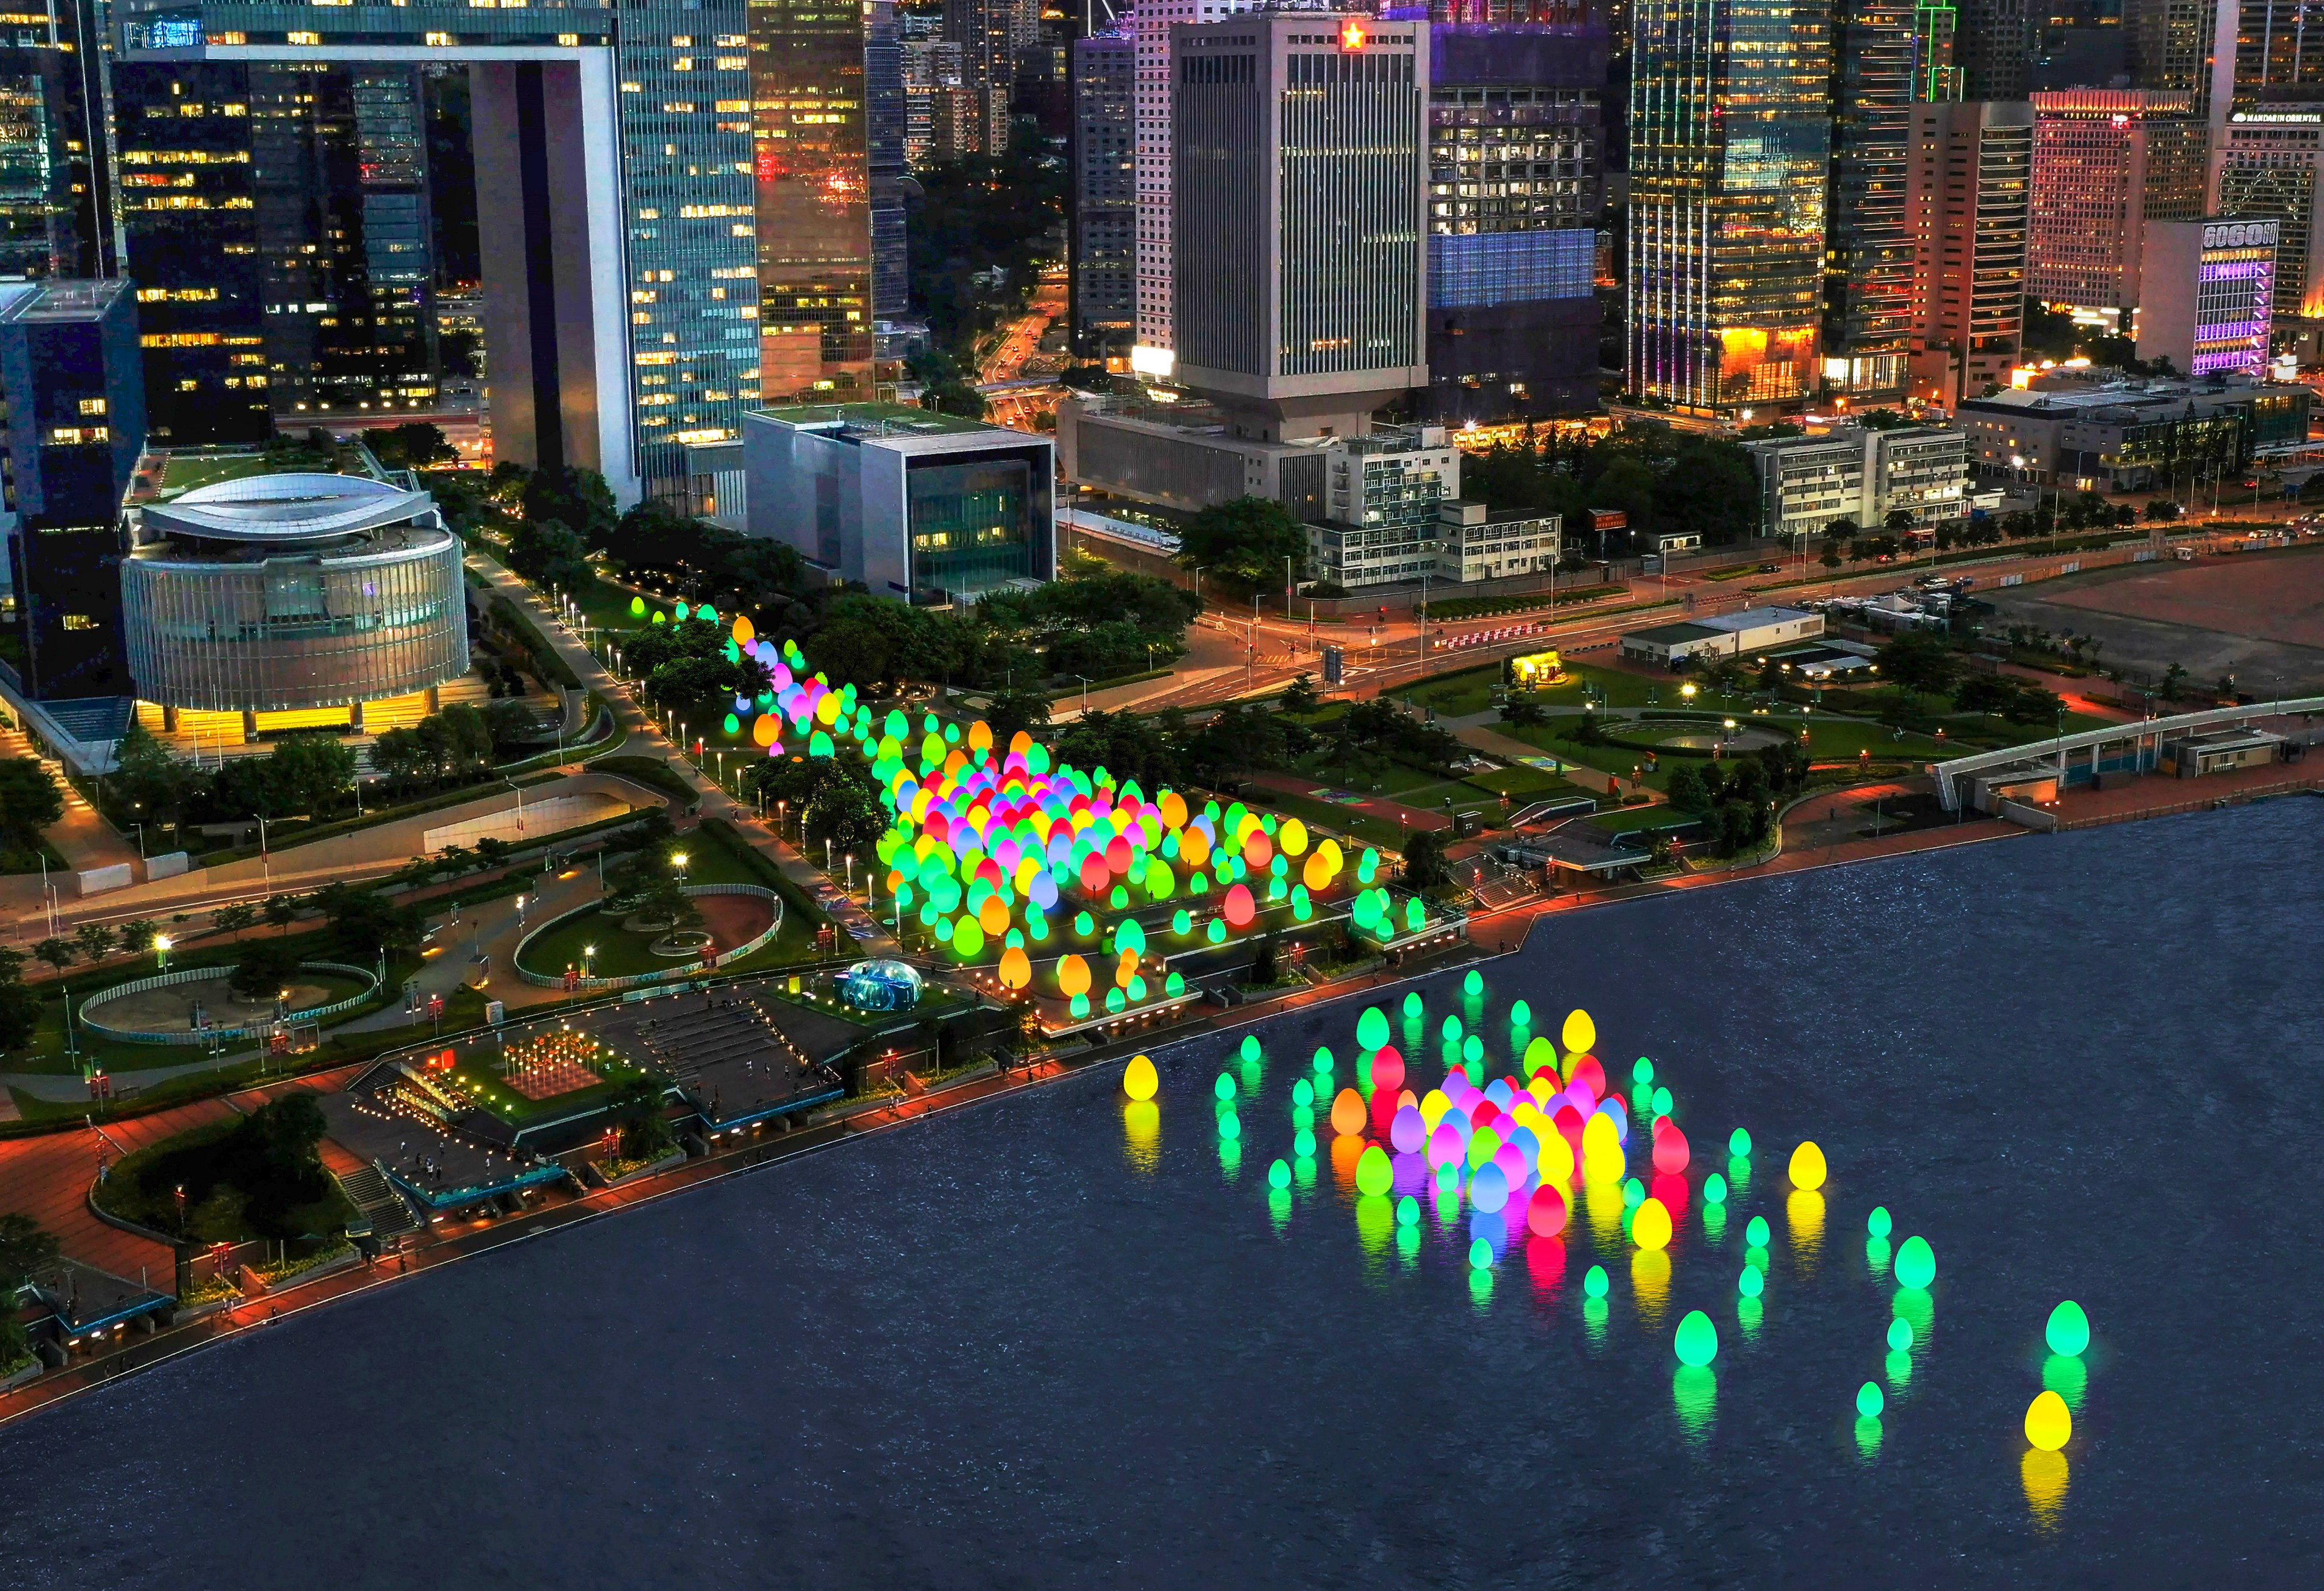 Hundreds of illuminated egg-shaped objects are set to light up Victoria Harbour later his month as part of “Art March”. Photo: Handout